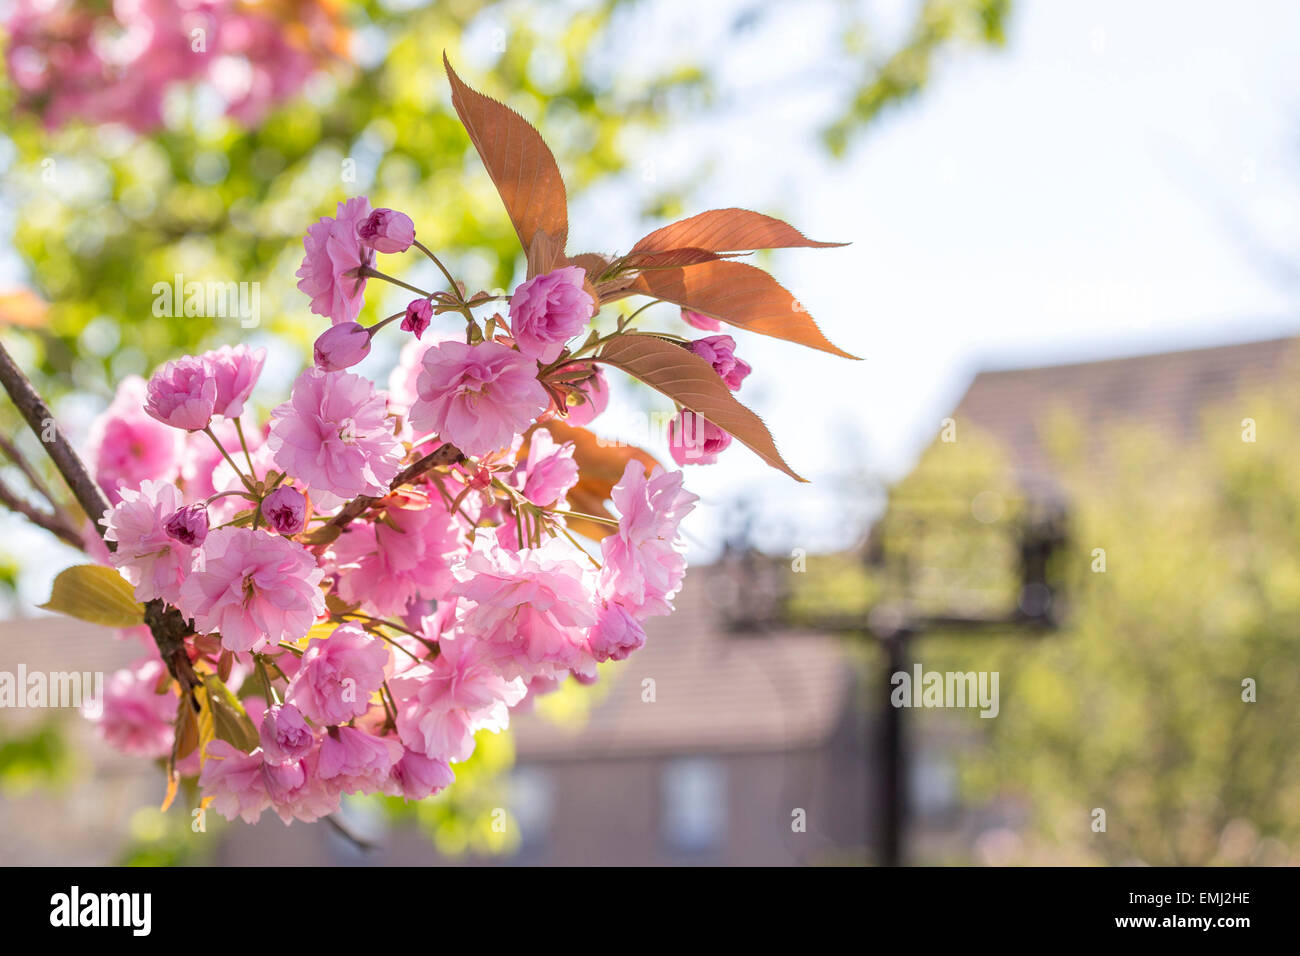 Corsham, UK. 21st Apr, 2015. The historic town of Corsham was the setting for the recent BBC drama Poldark. This Spring it is also home to a beautiful display of cherry blossom which is admired by the public enjoying the recent warm sunshine. Credit:  Wayne Farrell/Alamy Live News Stock Photo